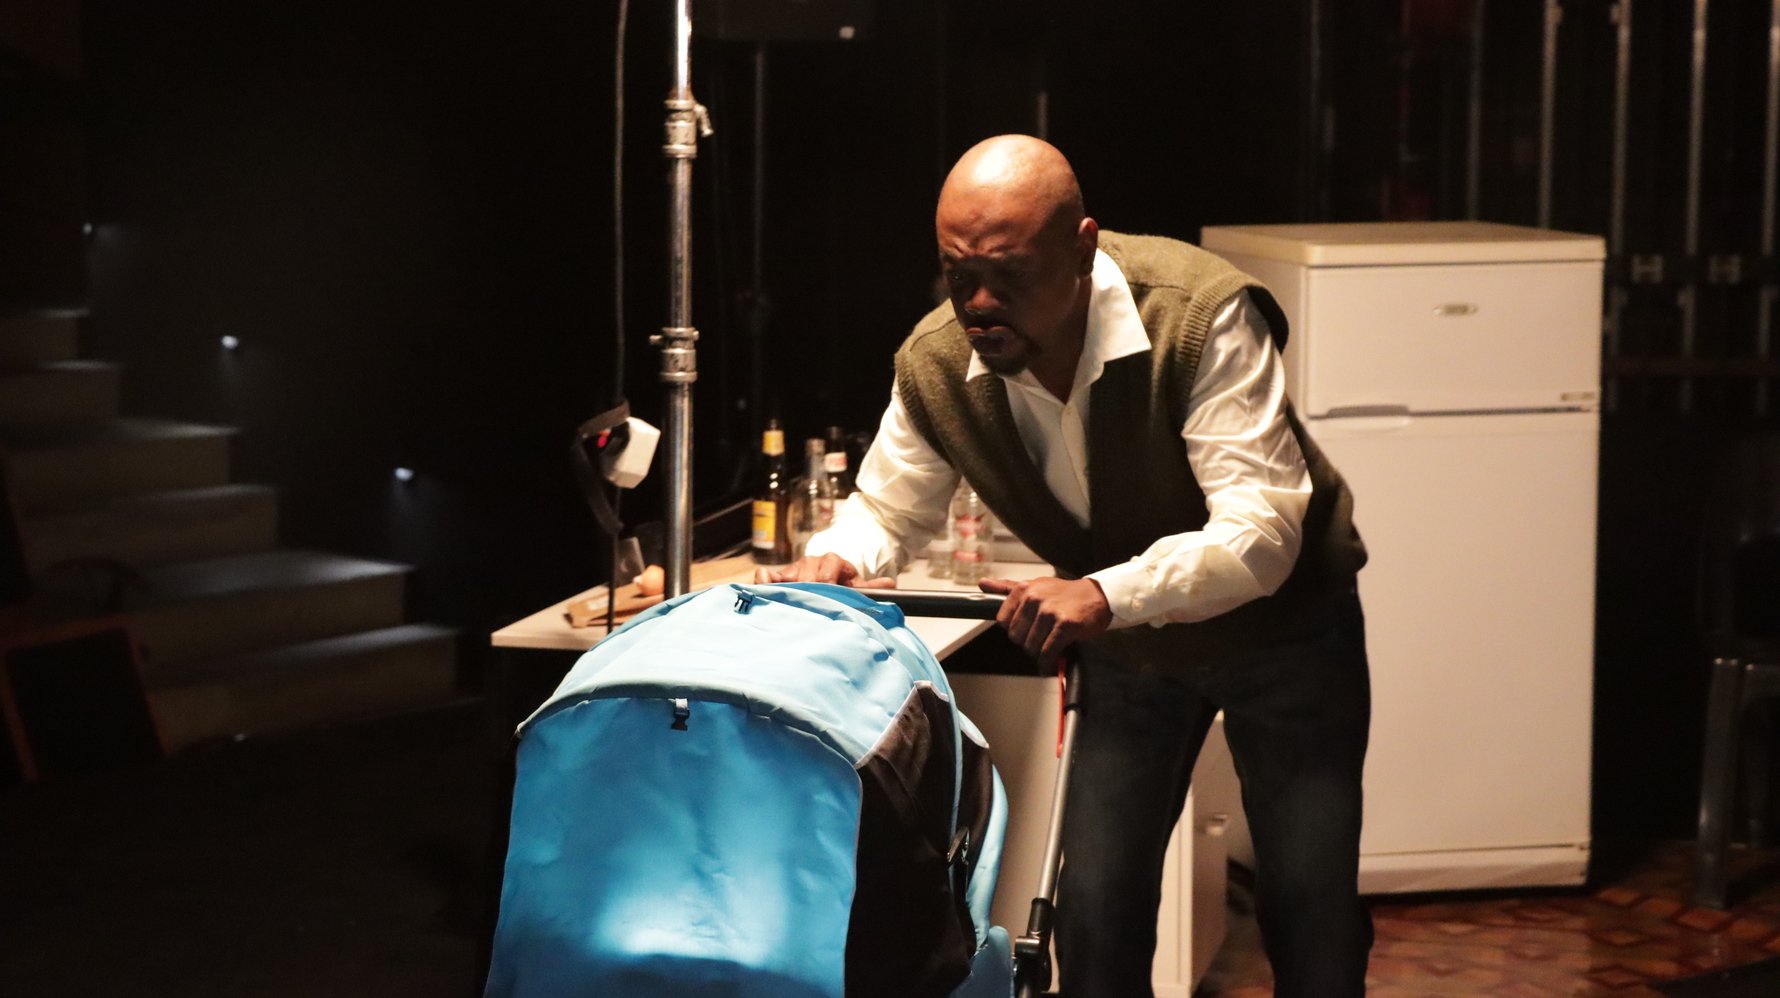 Well-known actor Fezile Mpela stars in this site-specific production, Macabre